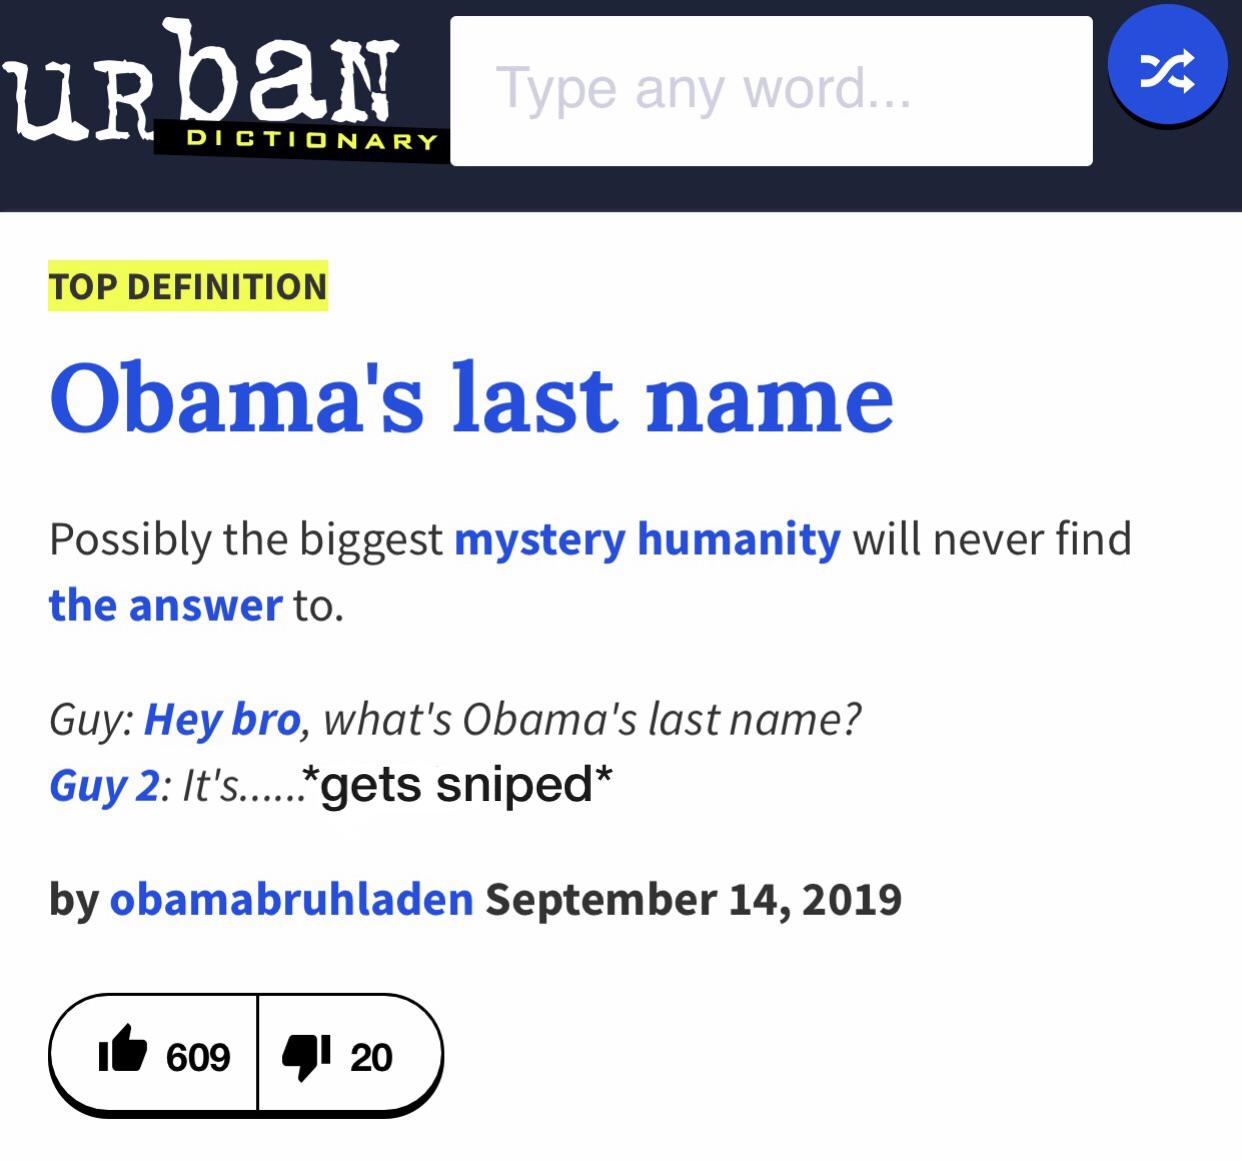 Dank Meme dank-memes cute text: Type any word... DI CT IONA RY TOP DEFINITION Obama's last name Possibly the biggest mystery humanity will never find the answer to. Guy: Hey bro, what's Obama's last name? *gets sniped* Guy 2: It's by obamabruhladen September 14, 2019 609 20 